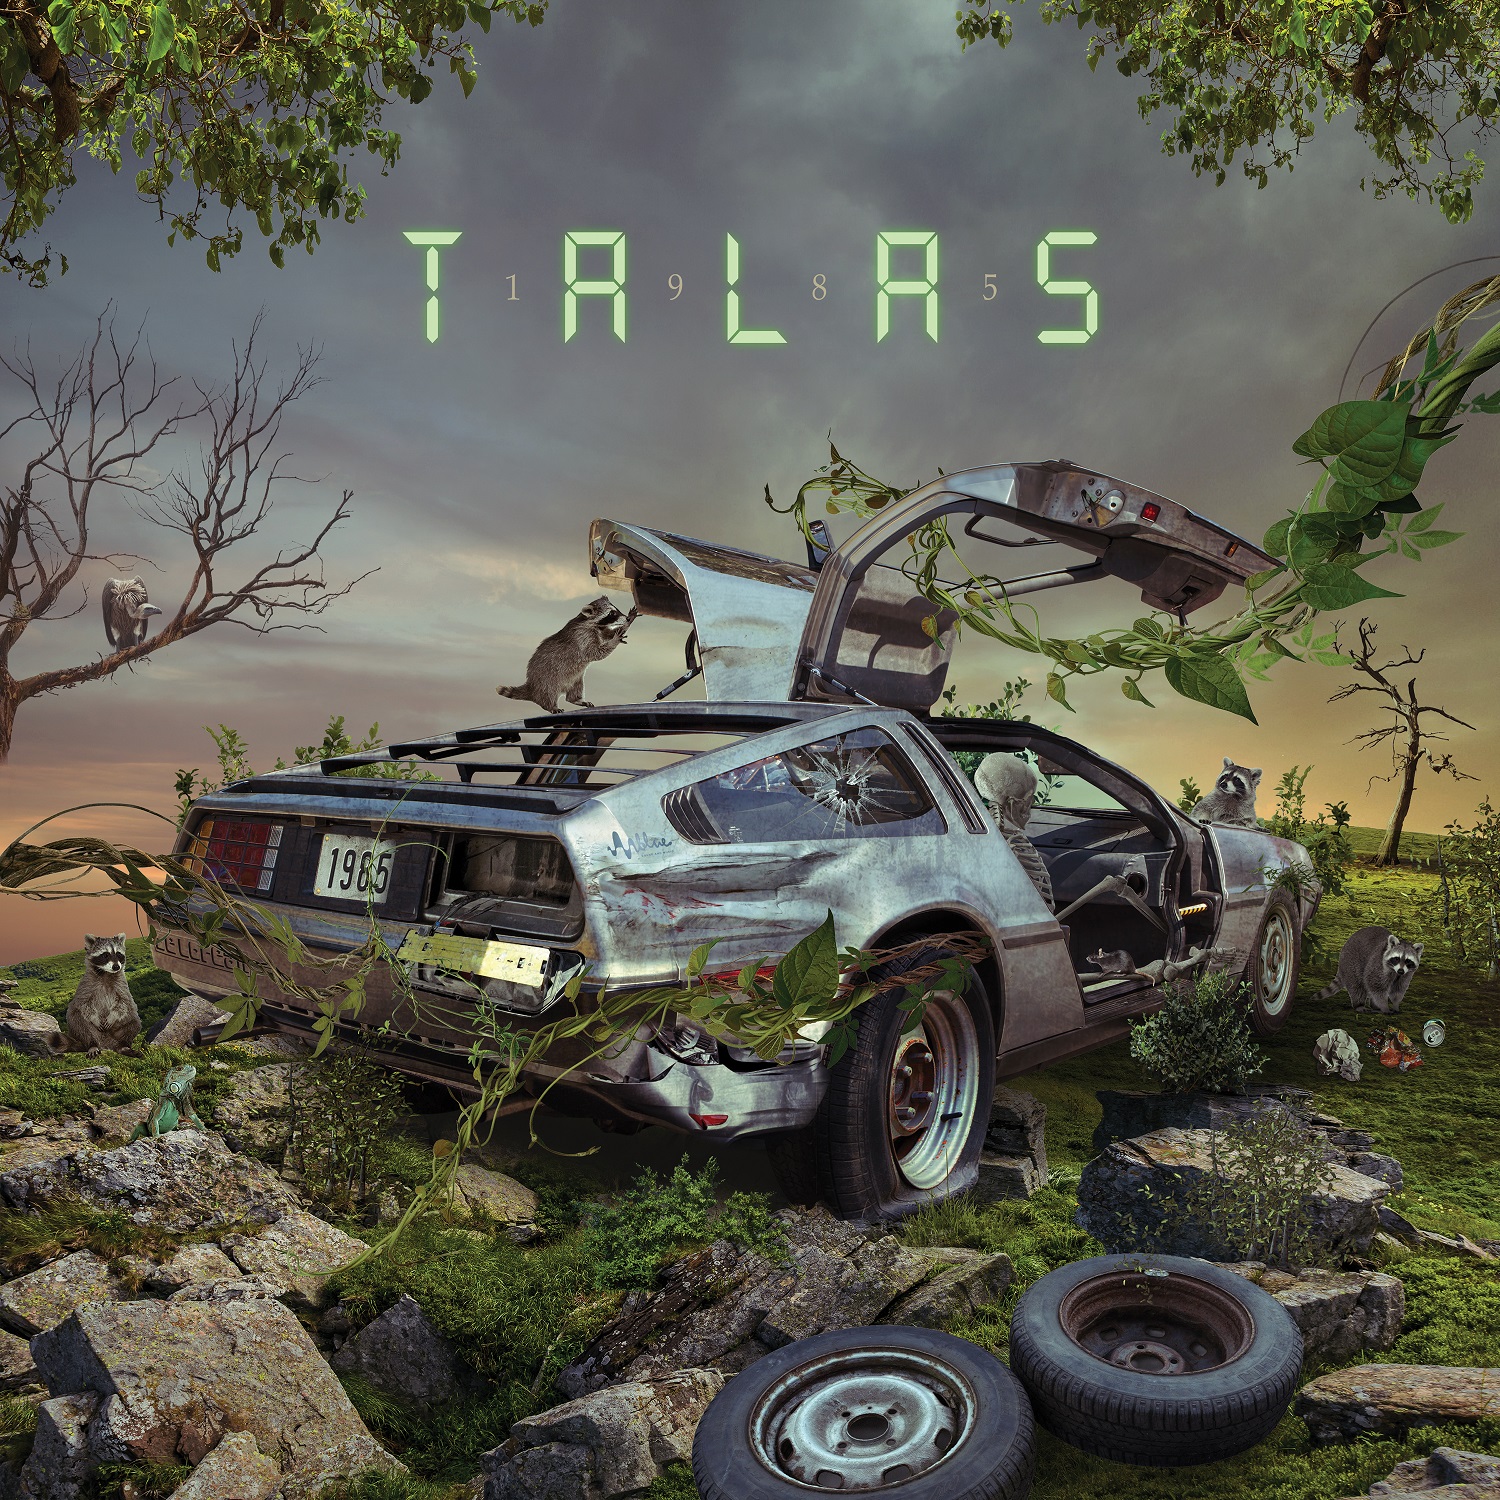 Talas - 1985 Review | Angry Metal Guy